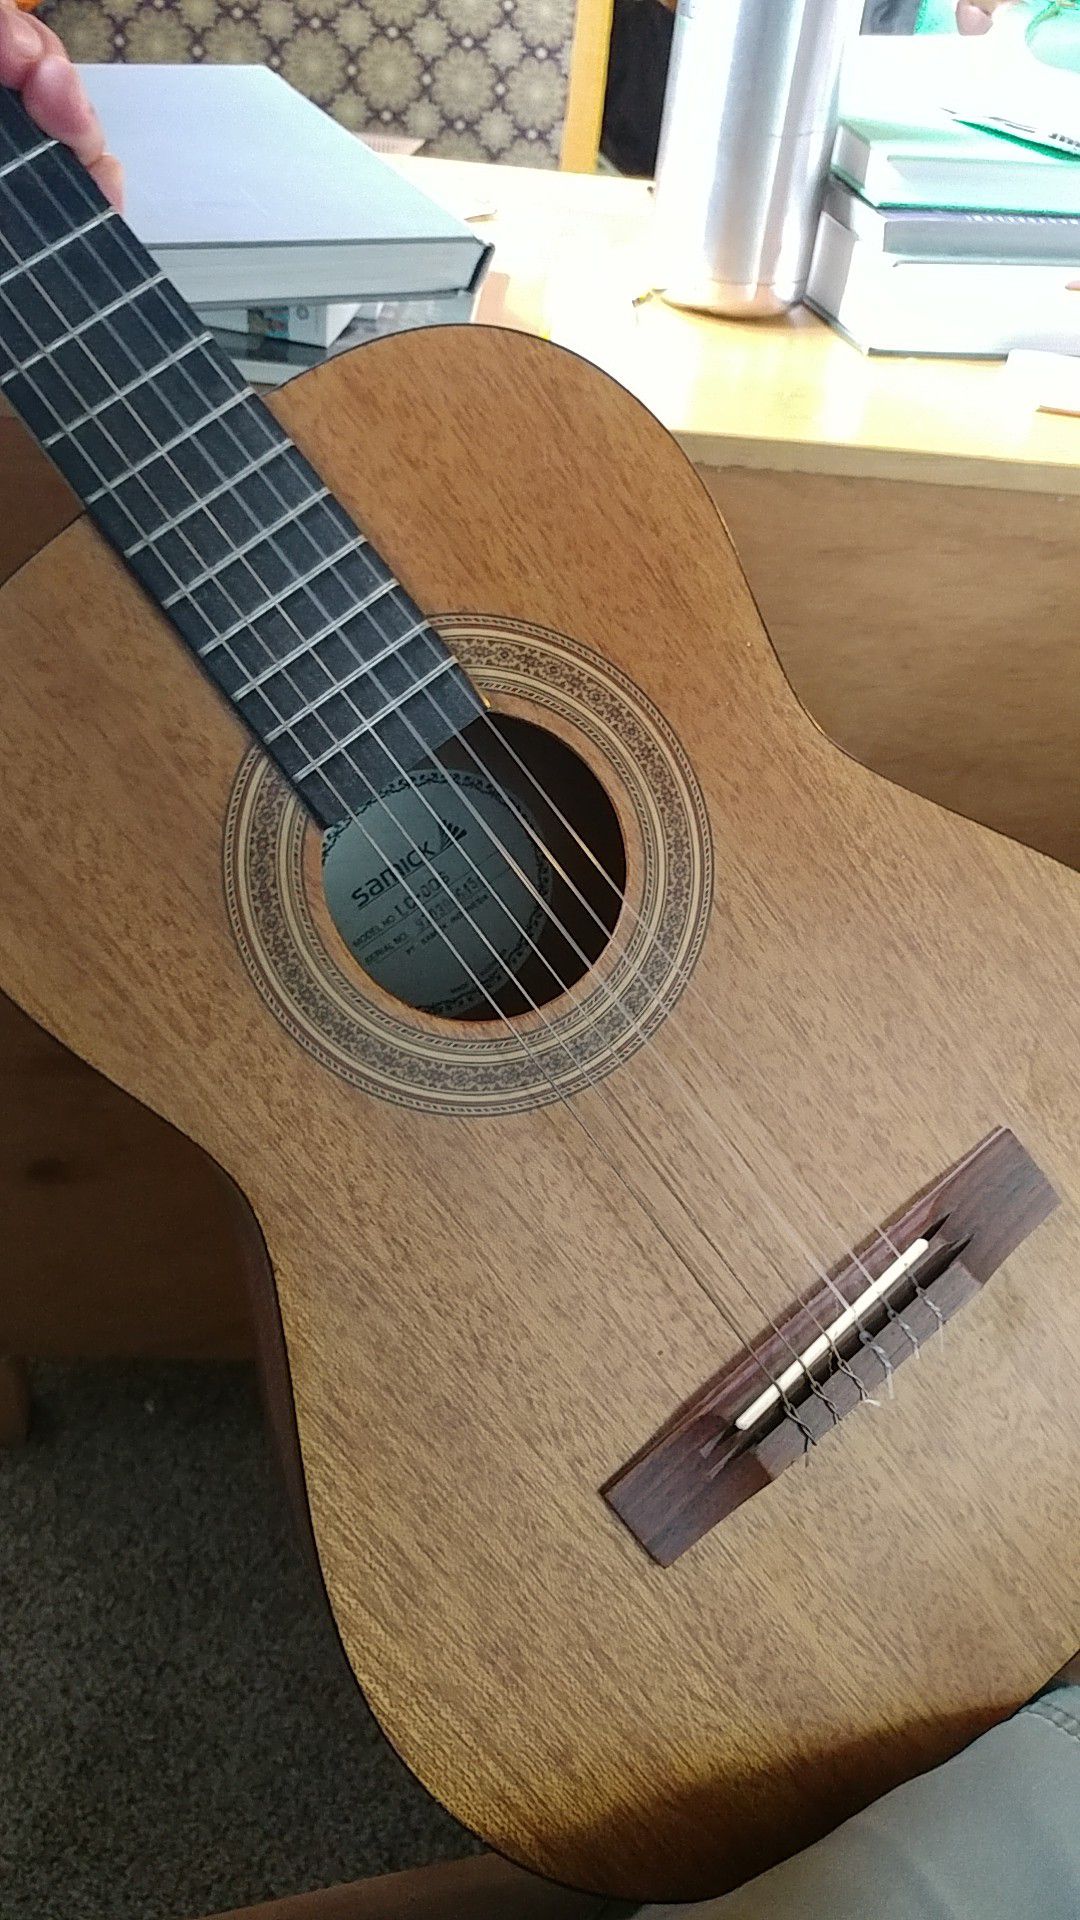 Acoustic guitar with nylon strings